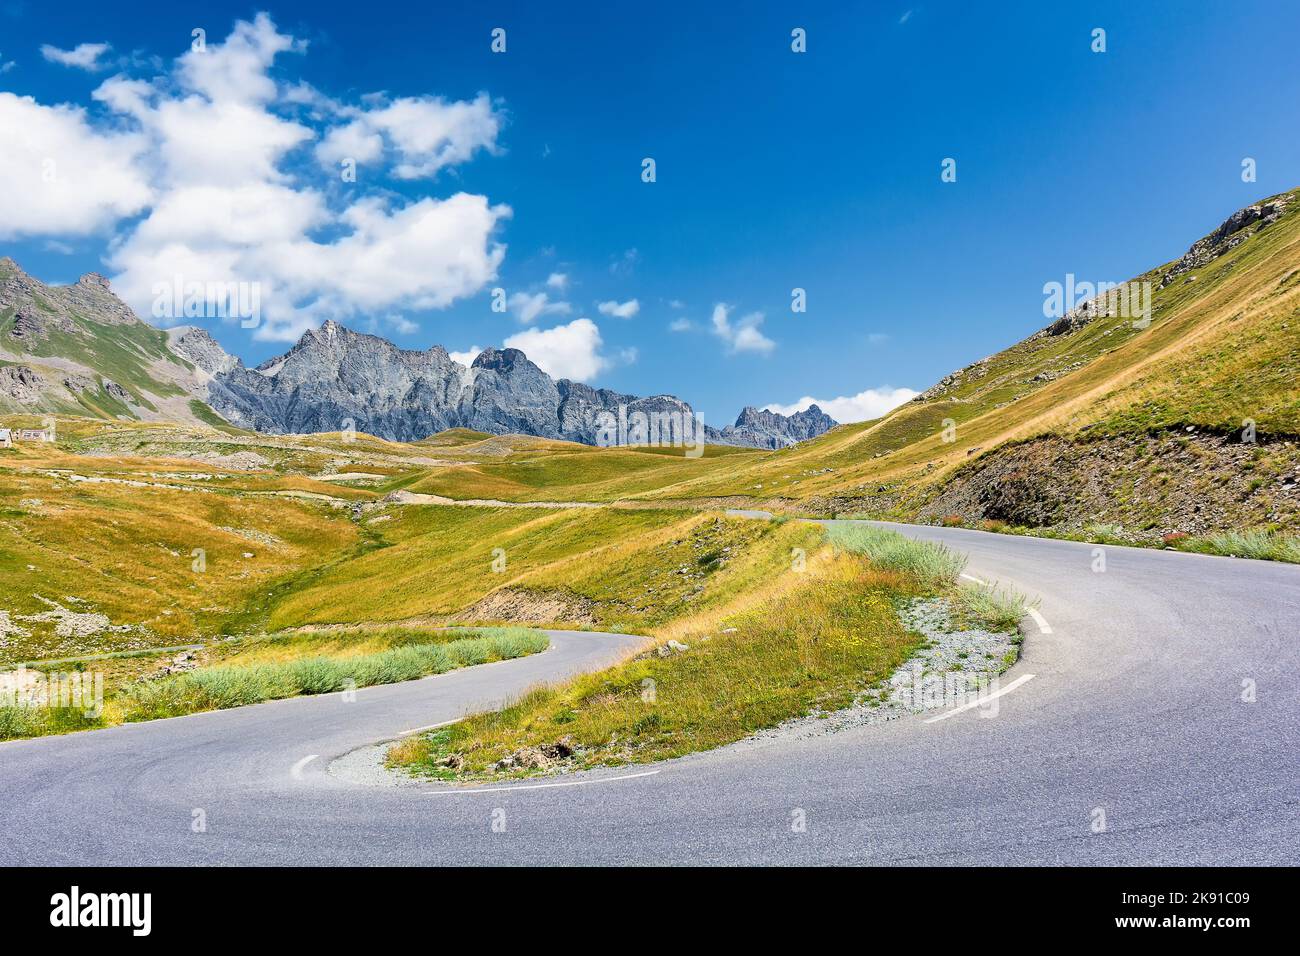 Scenic view of alpine road in the french Alps in Mercantour National Park in south of France Stock Photo